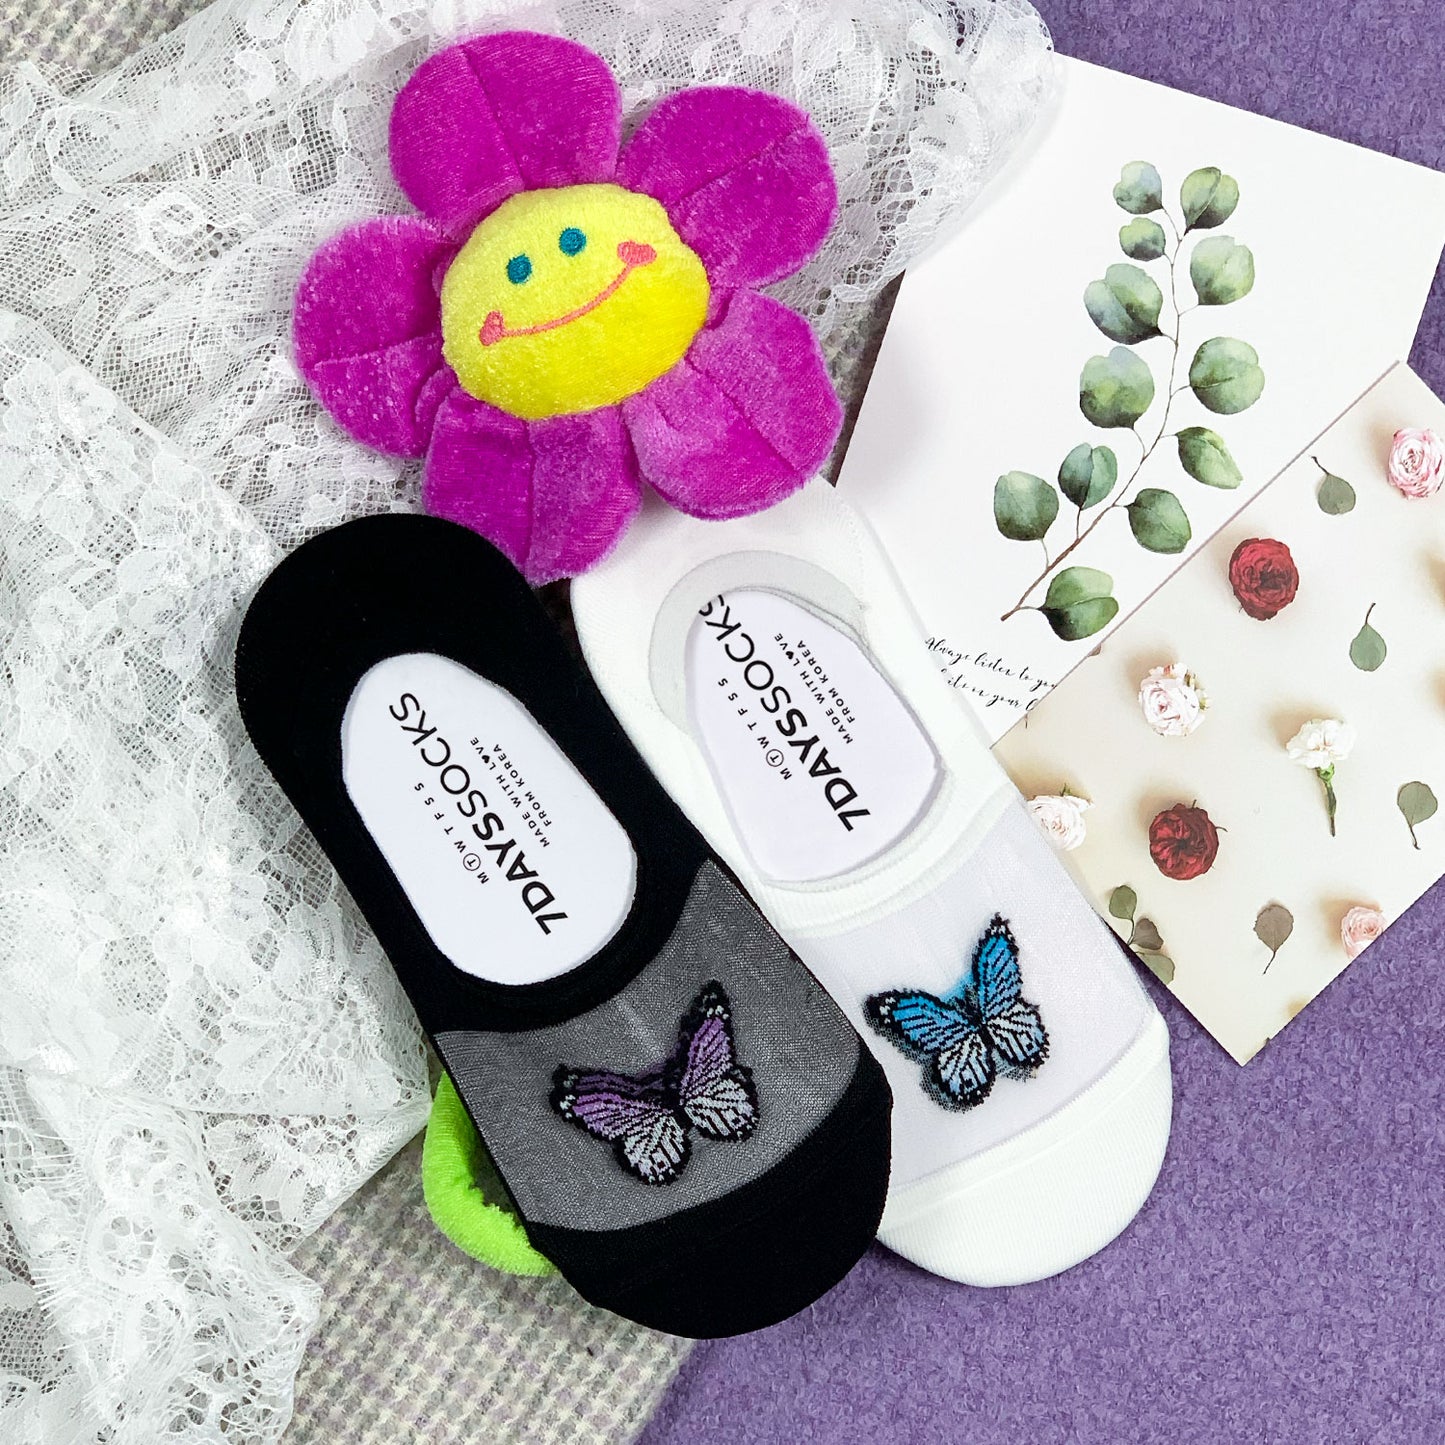 Women's No Show See-Through Butterfly Socks